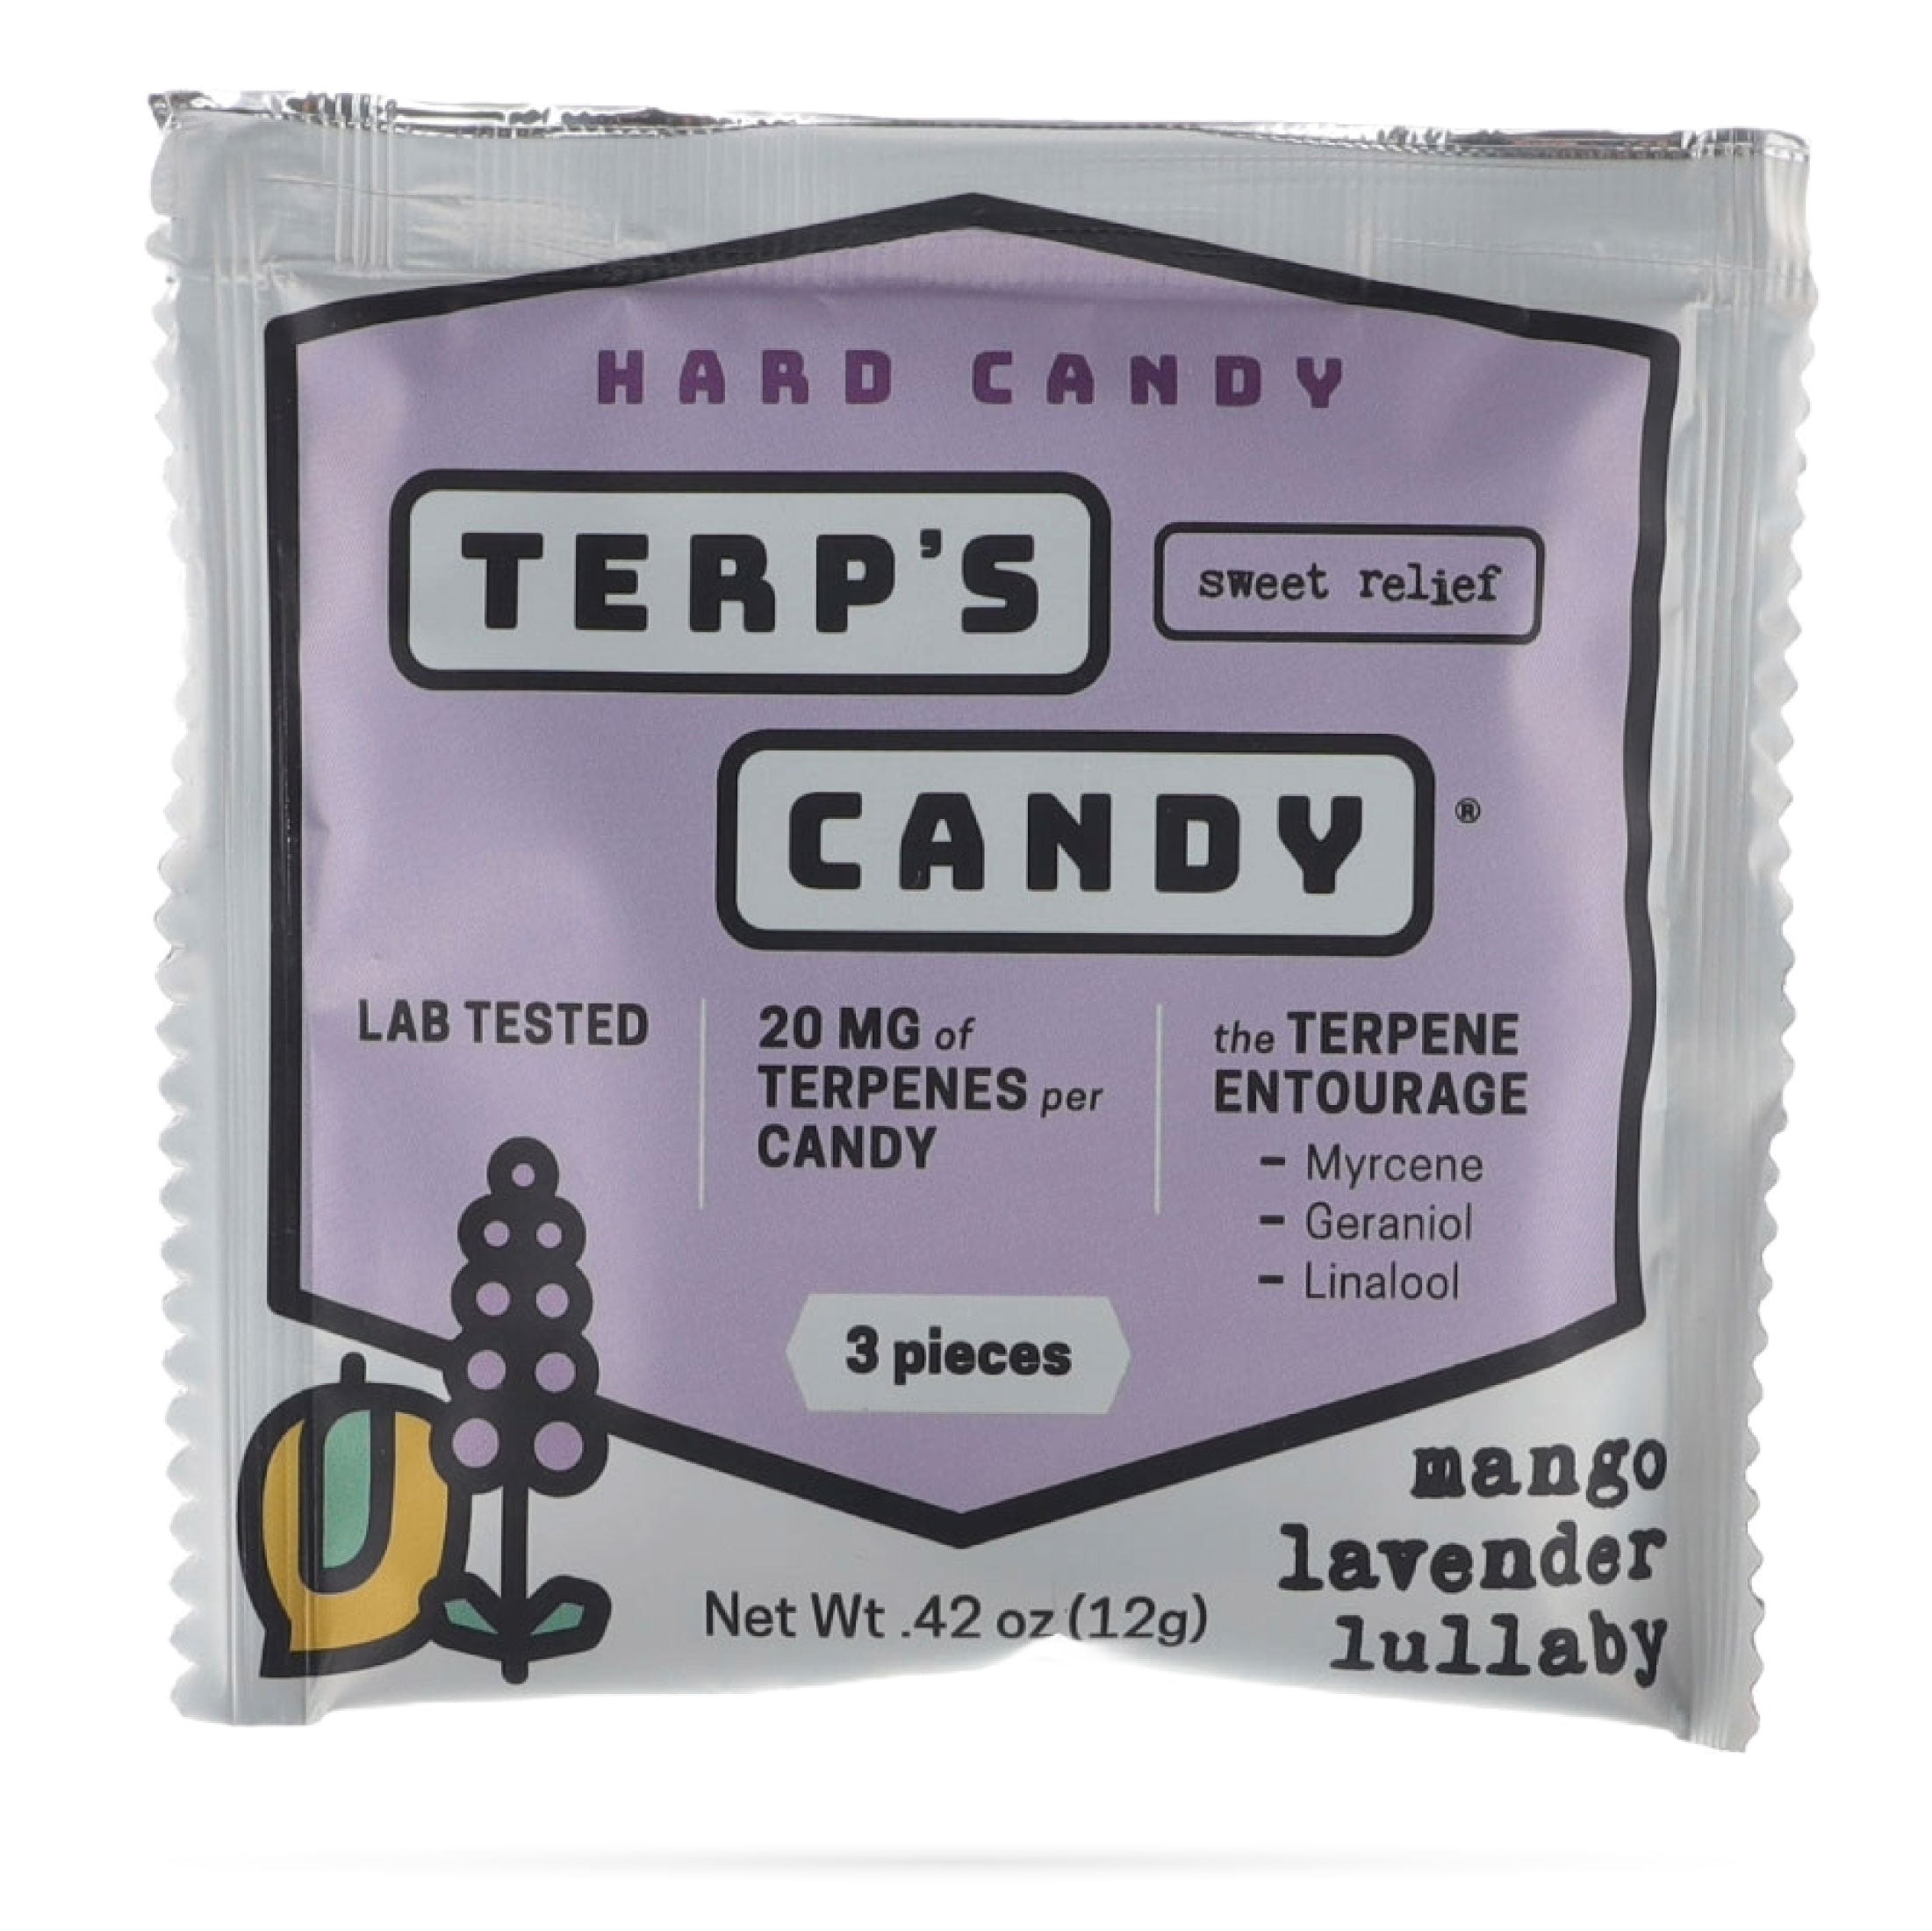 Image of Terp's Candy Mango Lavender Lullaby 3pc pouch.